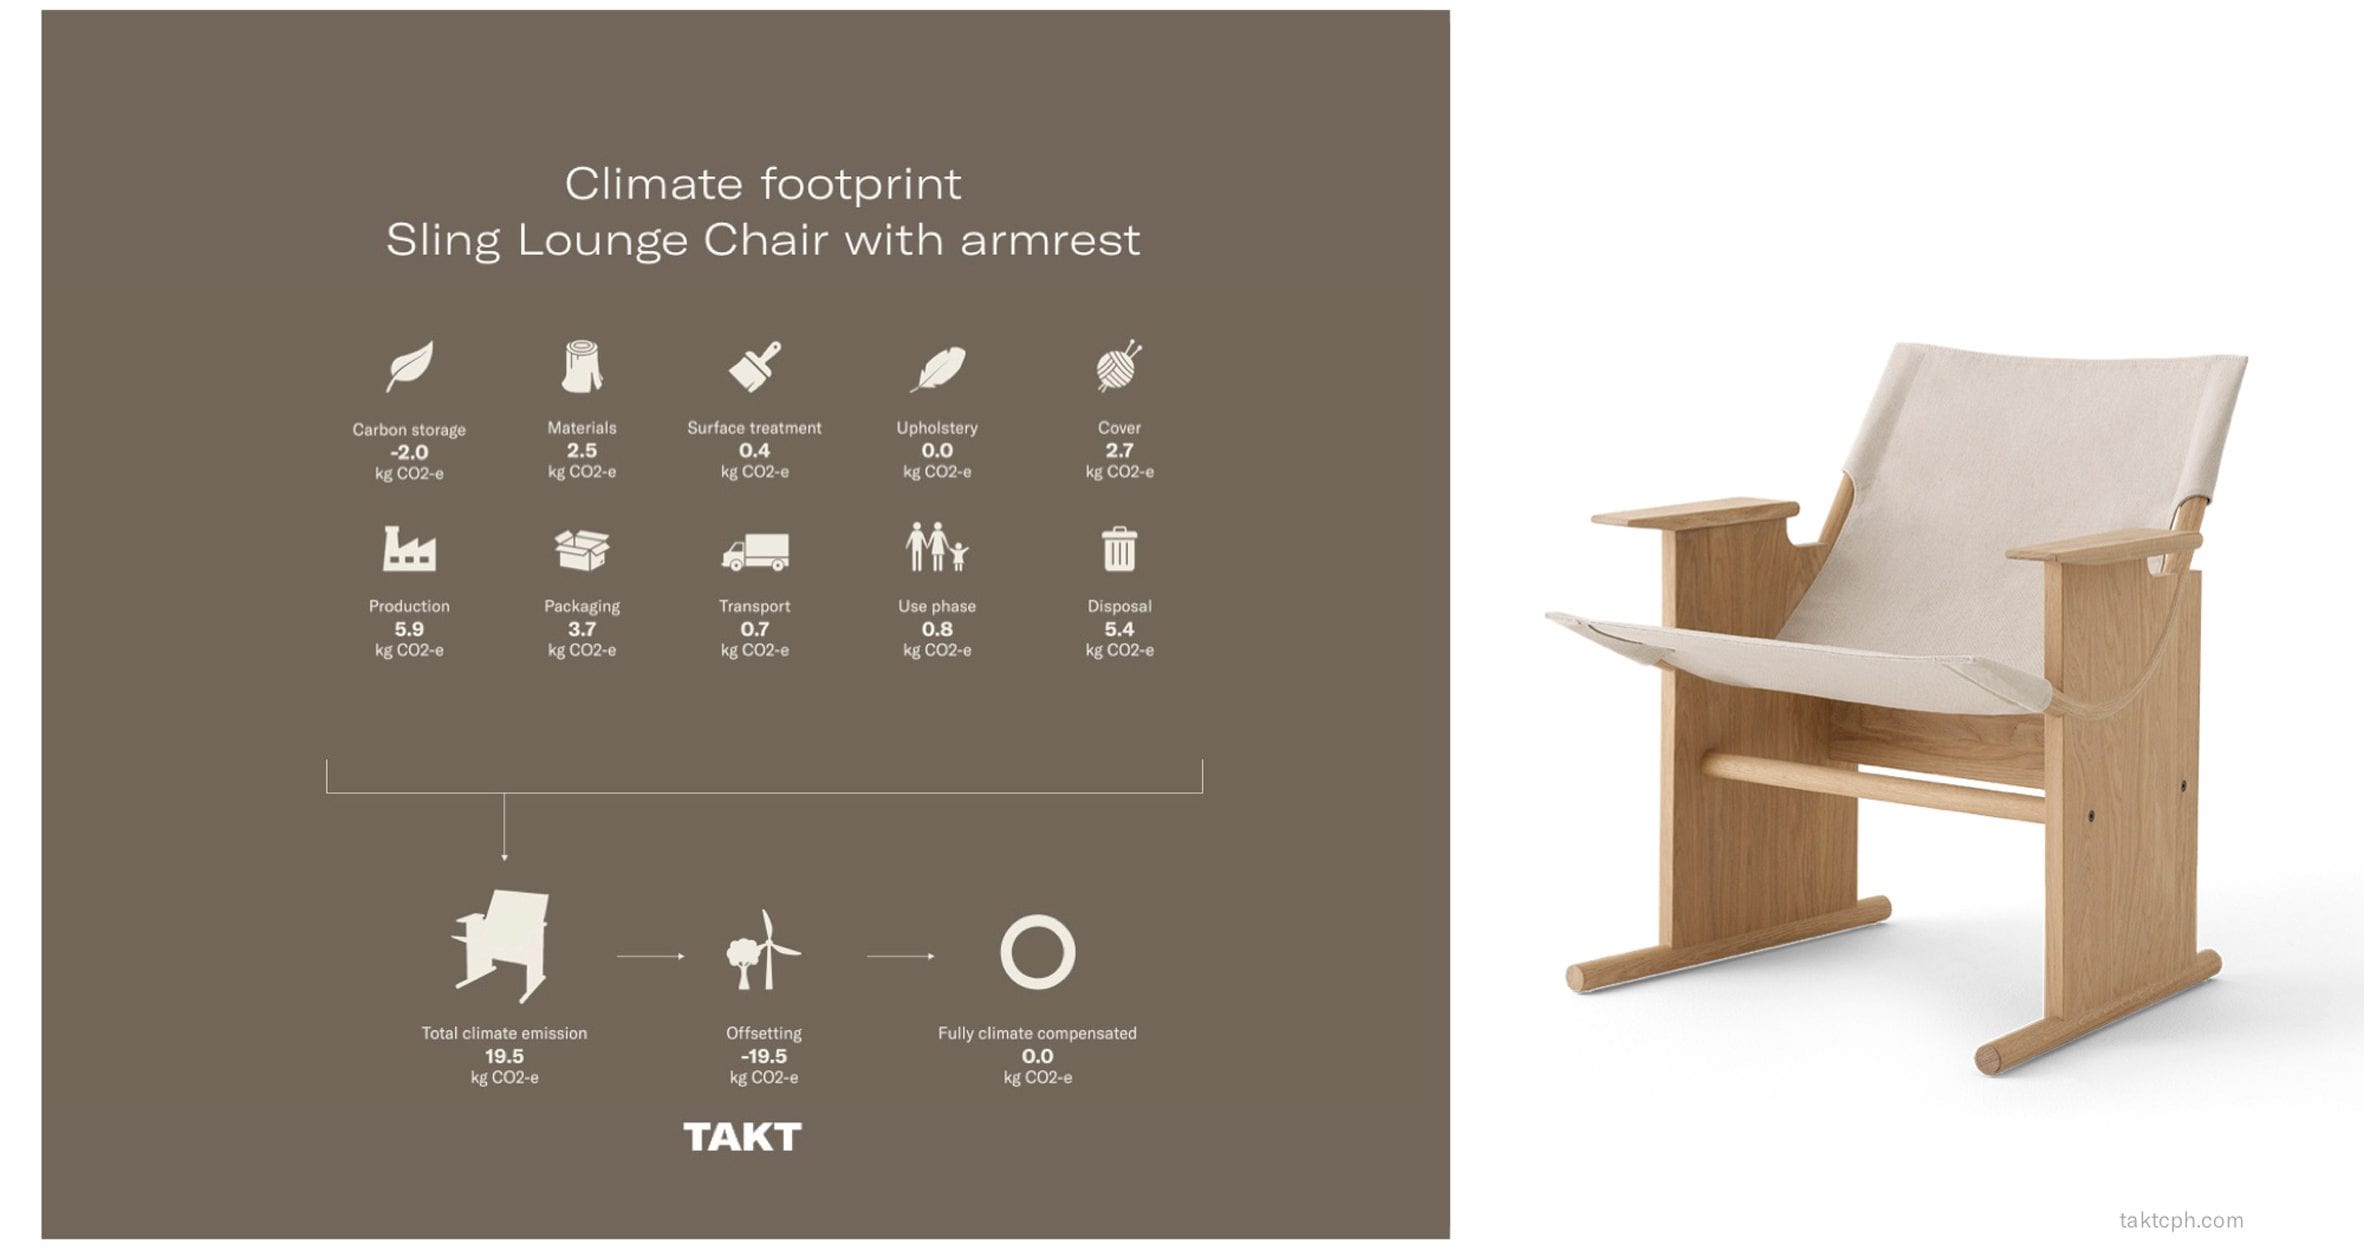 Lifetime emissions of the Sling lounge chair by Takt